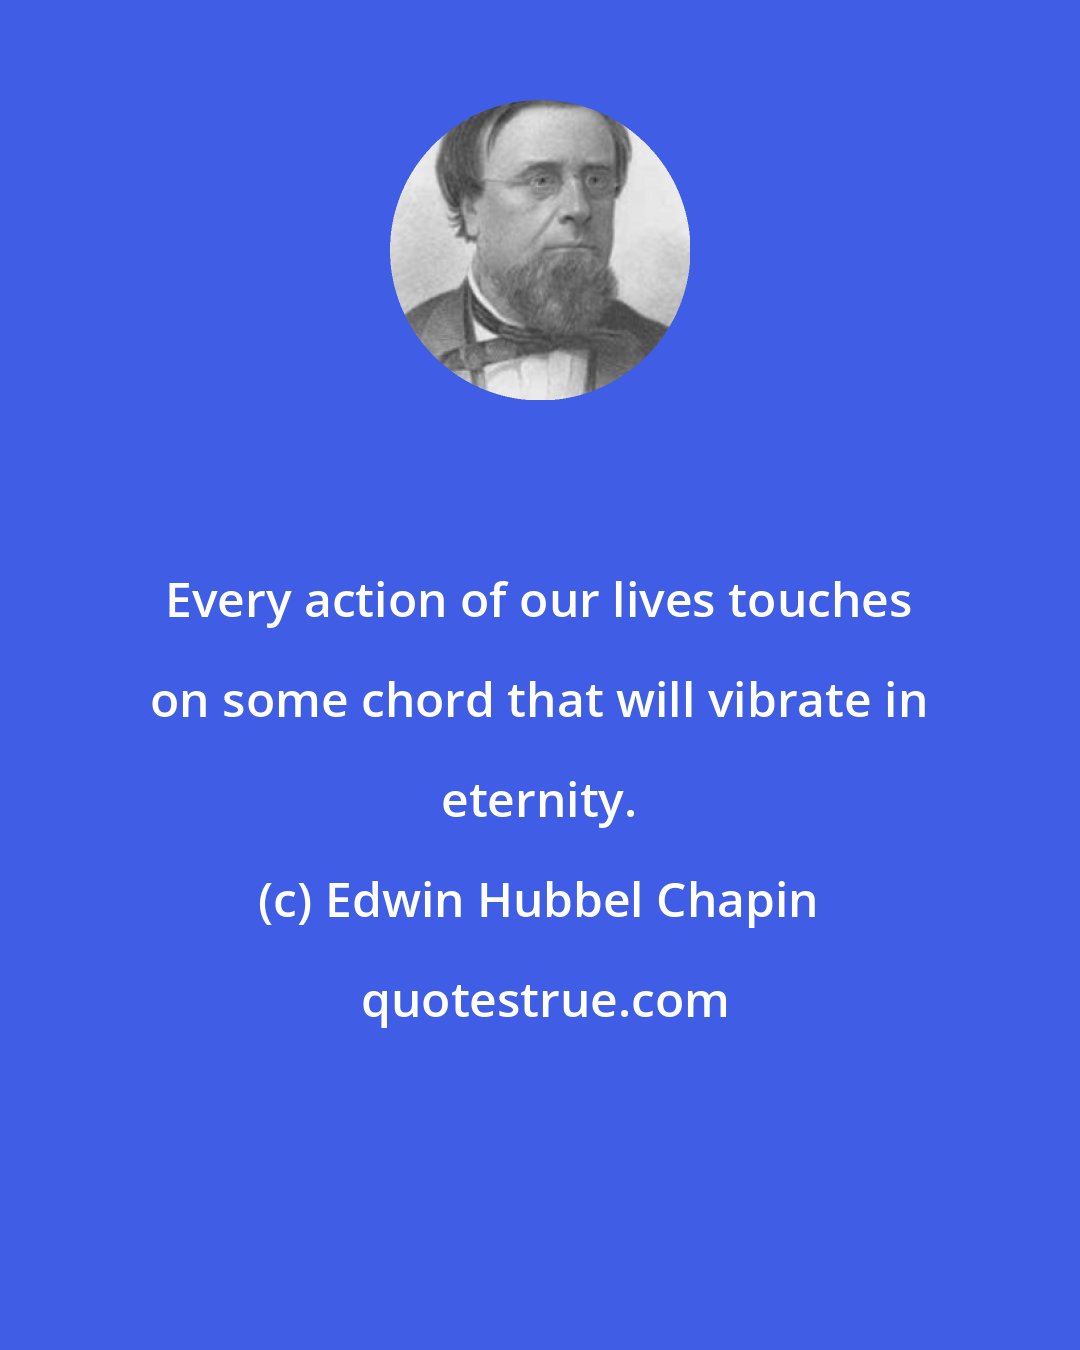 Edwin Hubbel Chapin: Every action of our lives touches on some chord that will vibrate in eternity.